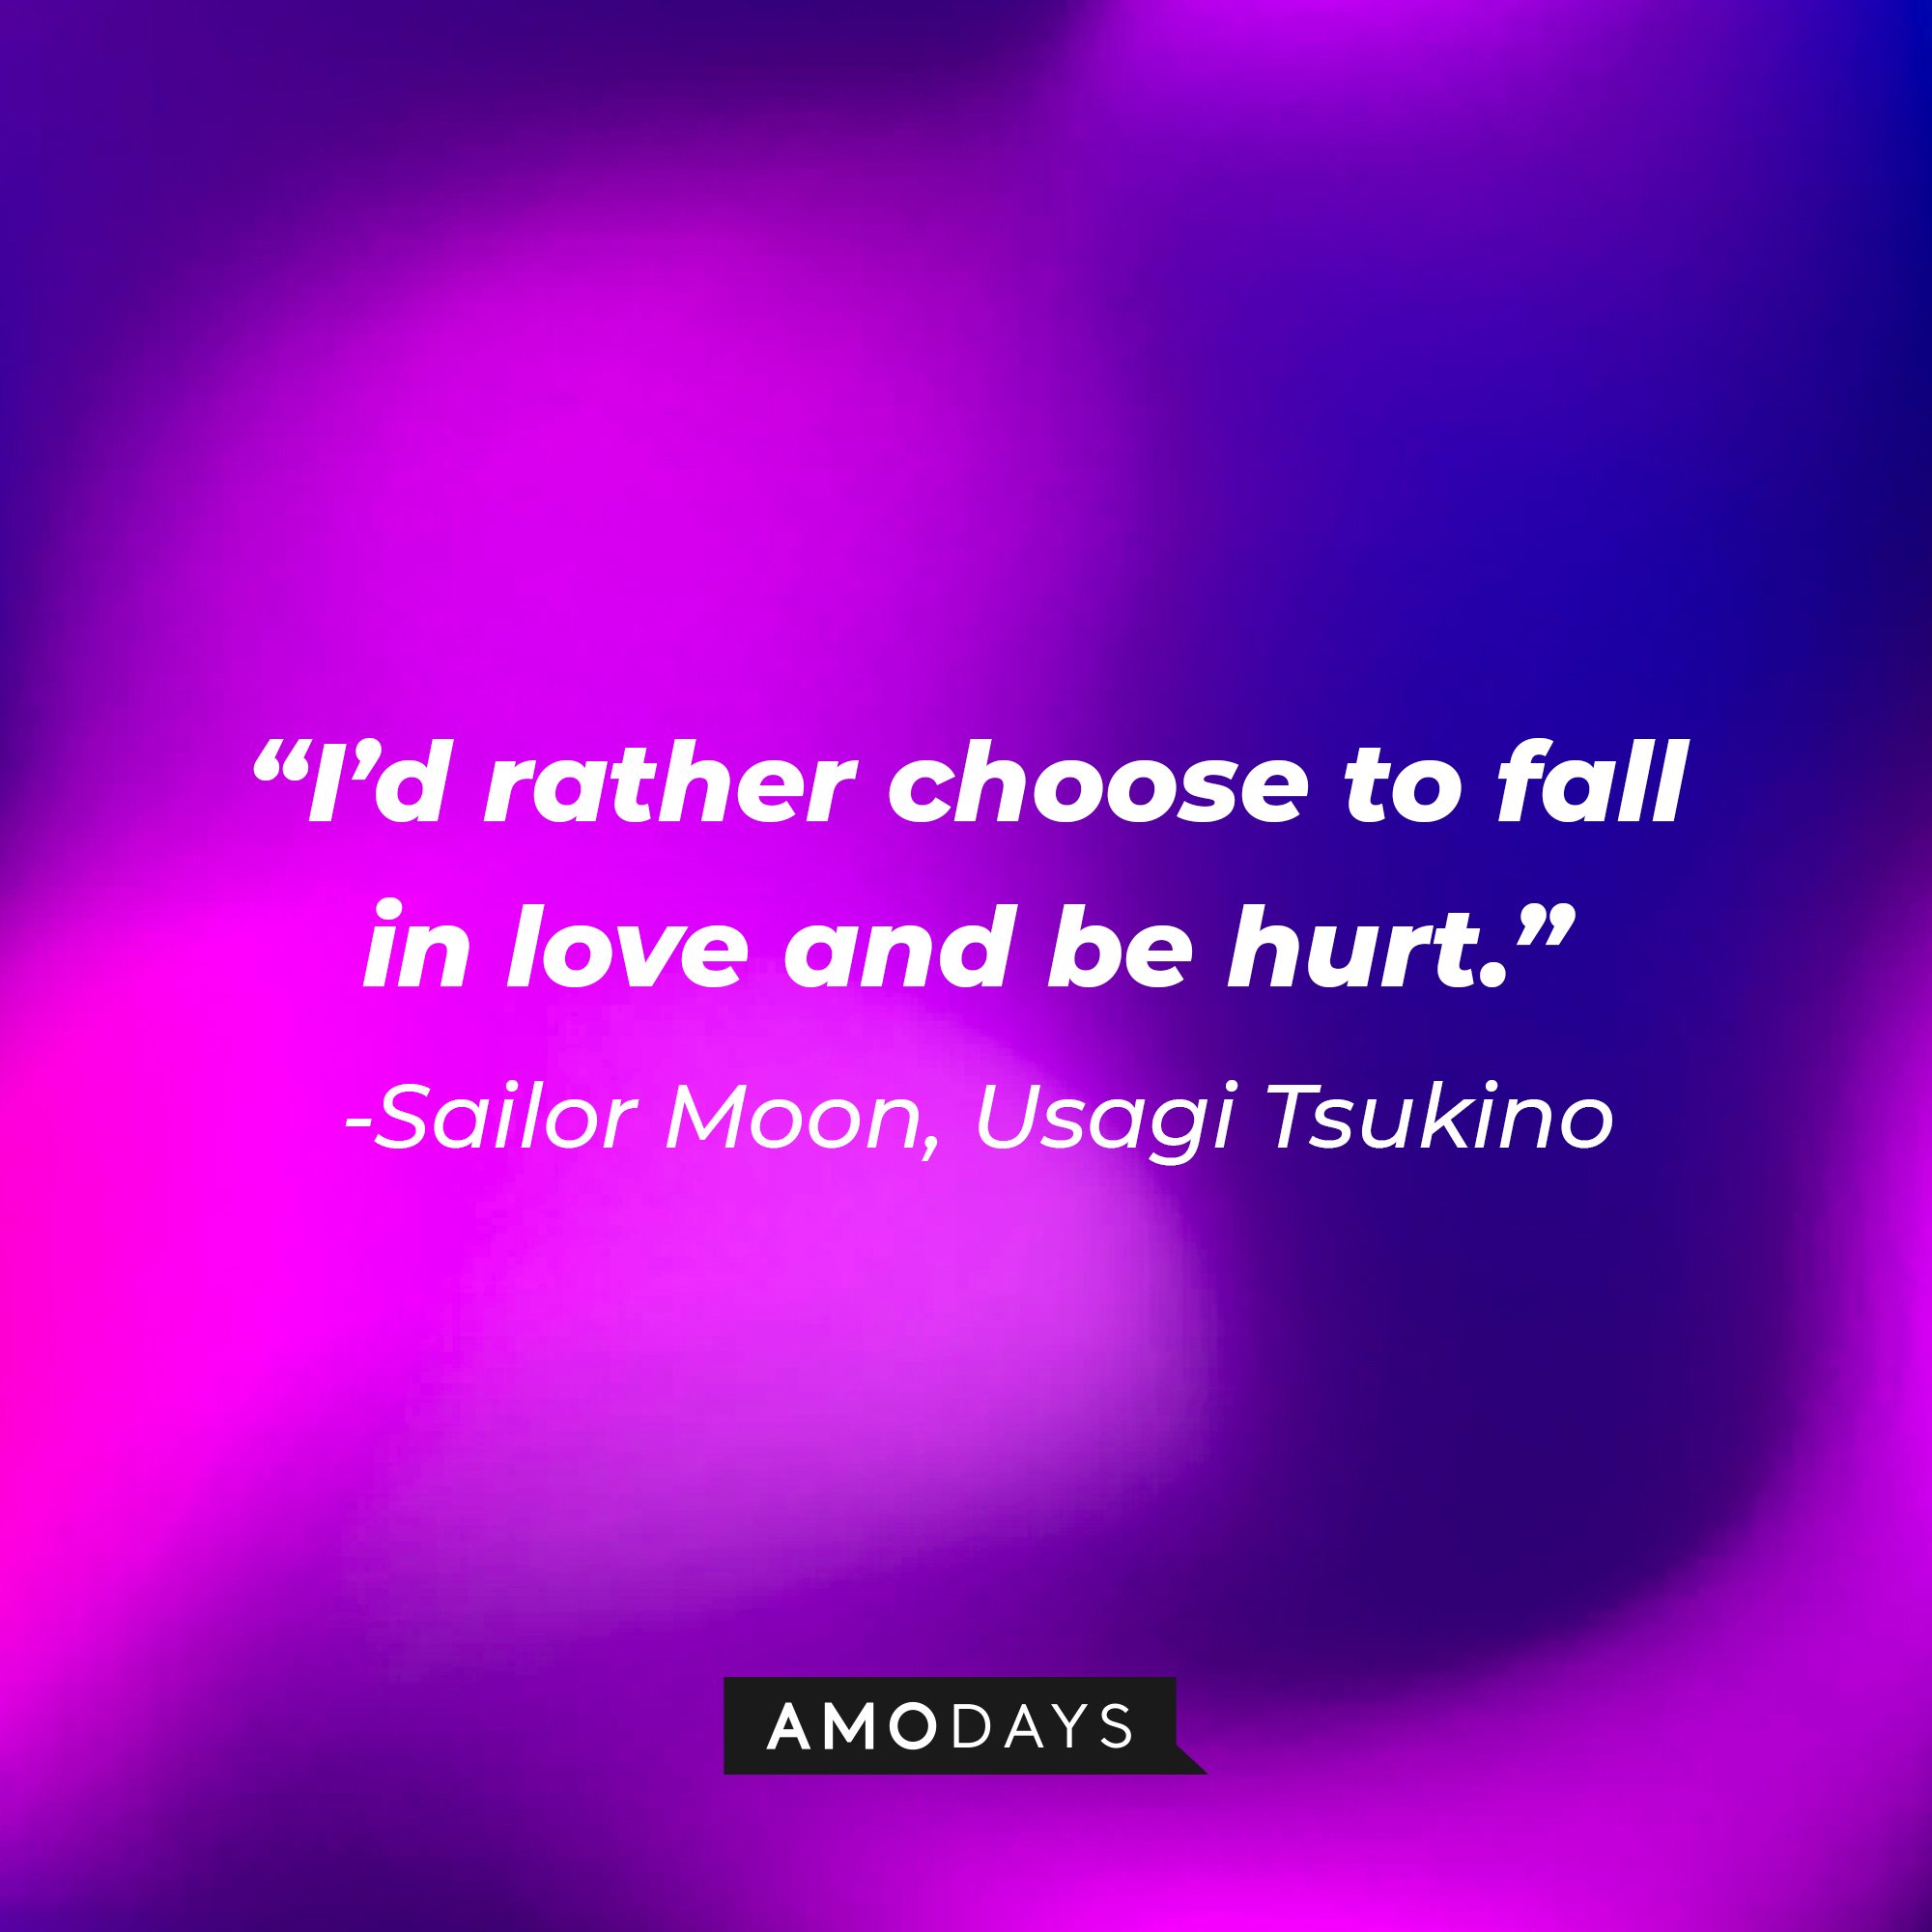 Sailor Moon/Usagi Tsukino’s quote: “I'd rather choose to fall in love and be hurt." | Image: AmoDays